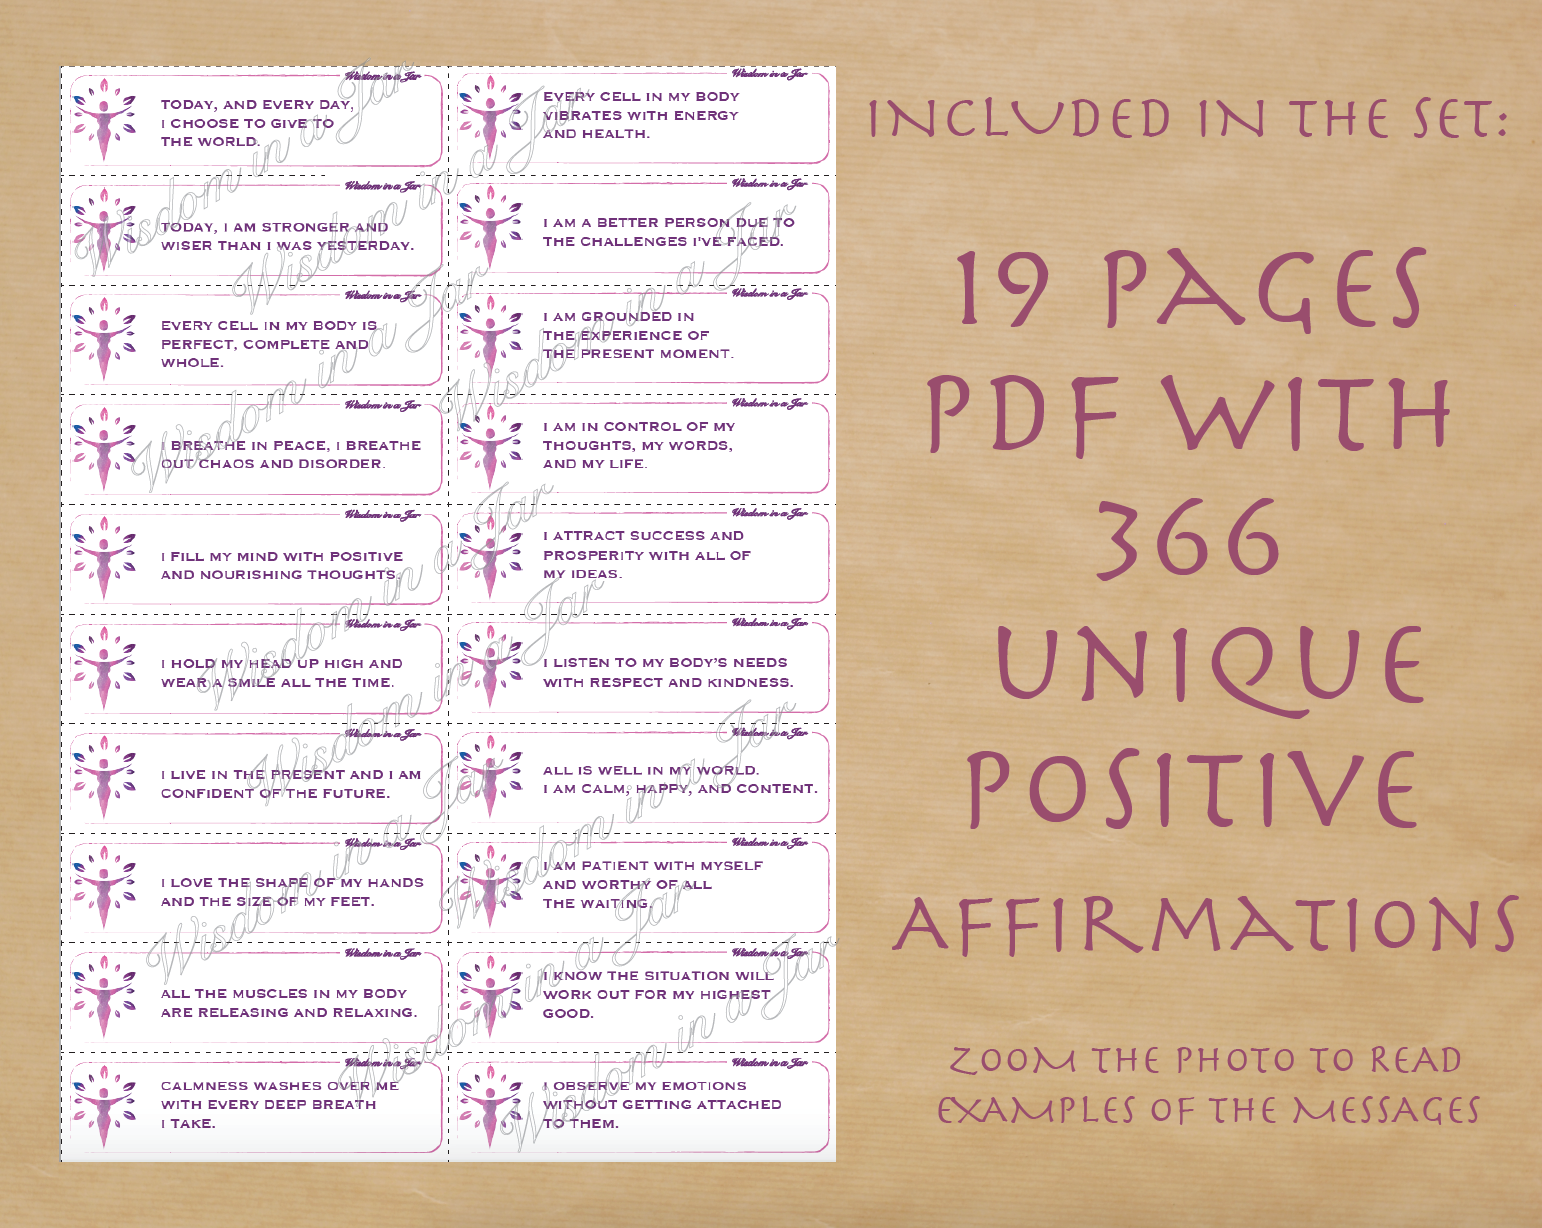 Affirmations women positive for 50 Ultimate